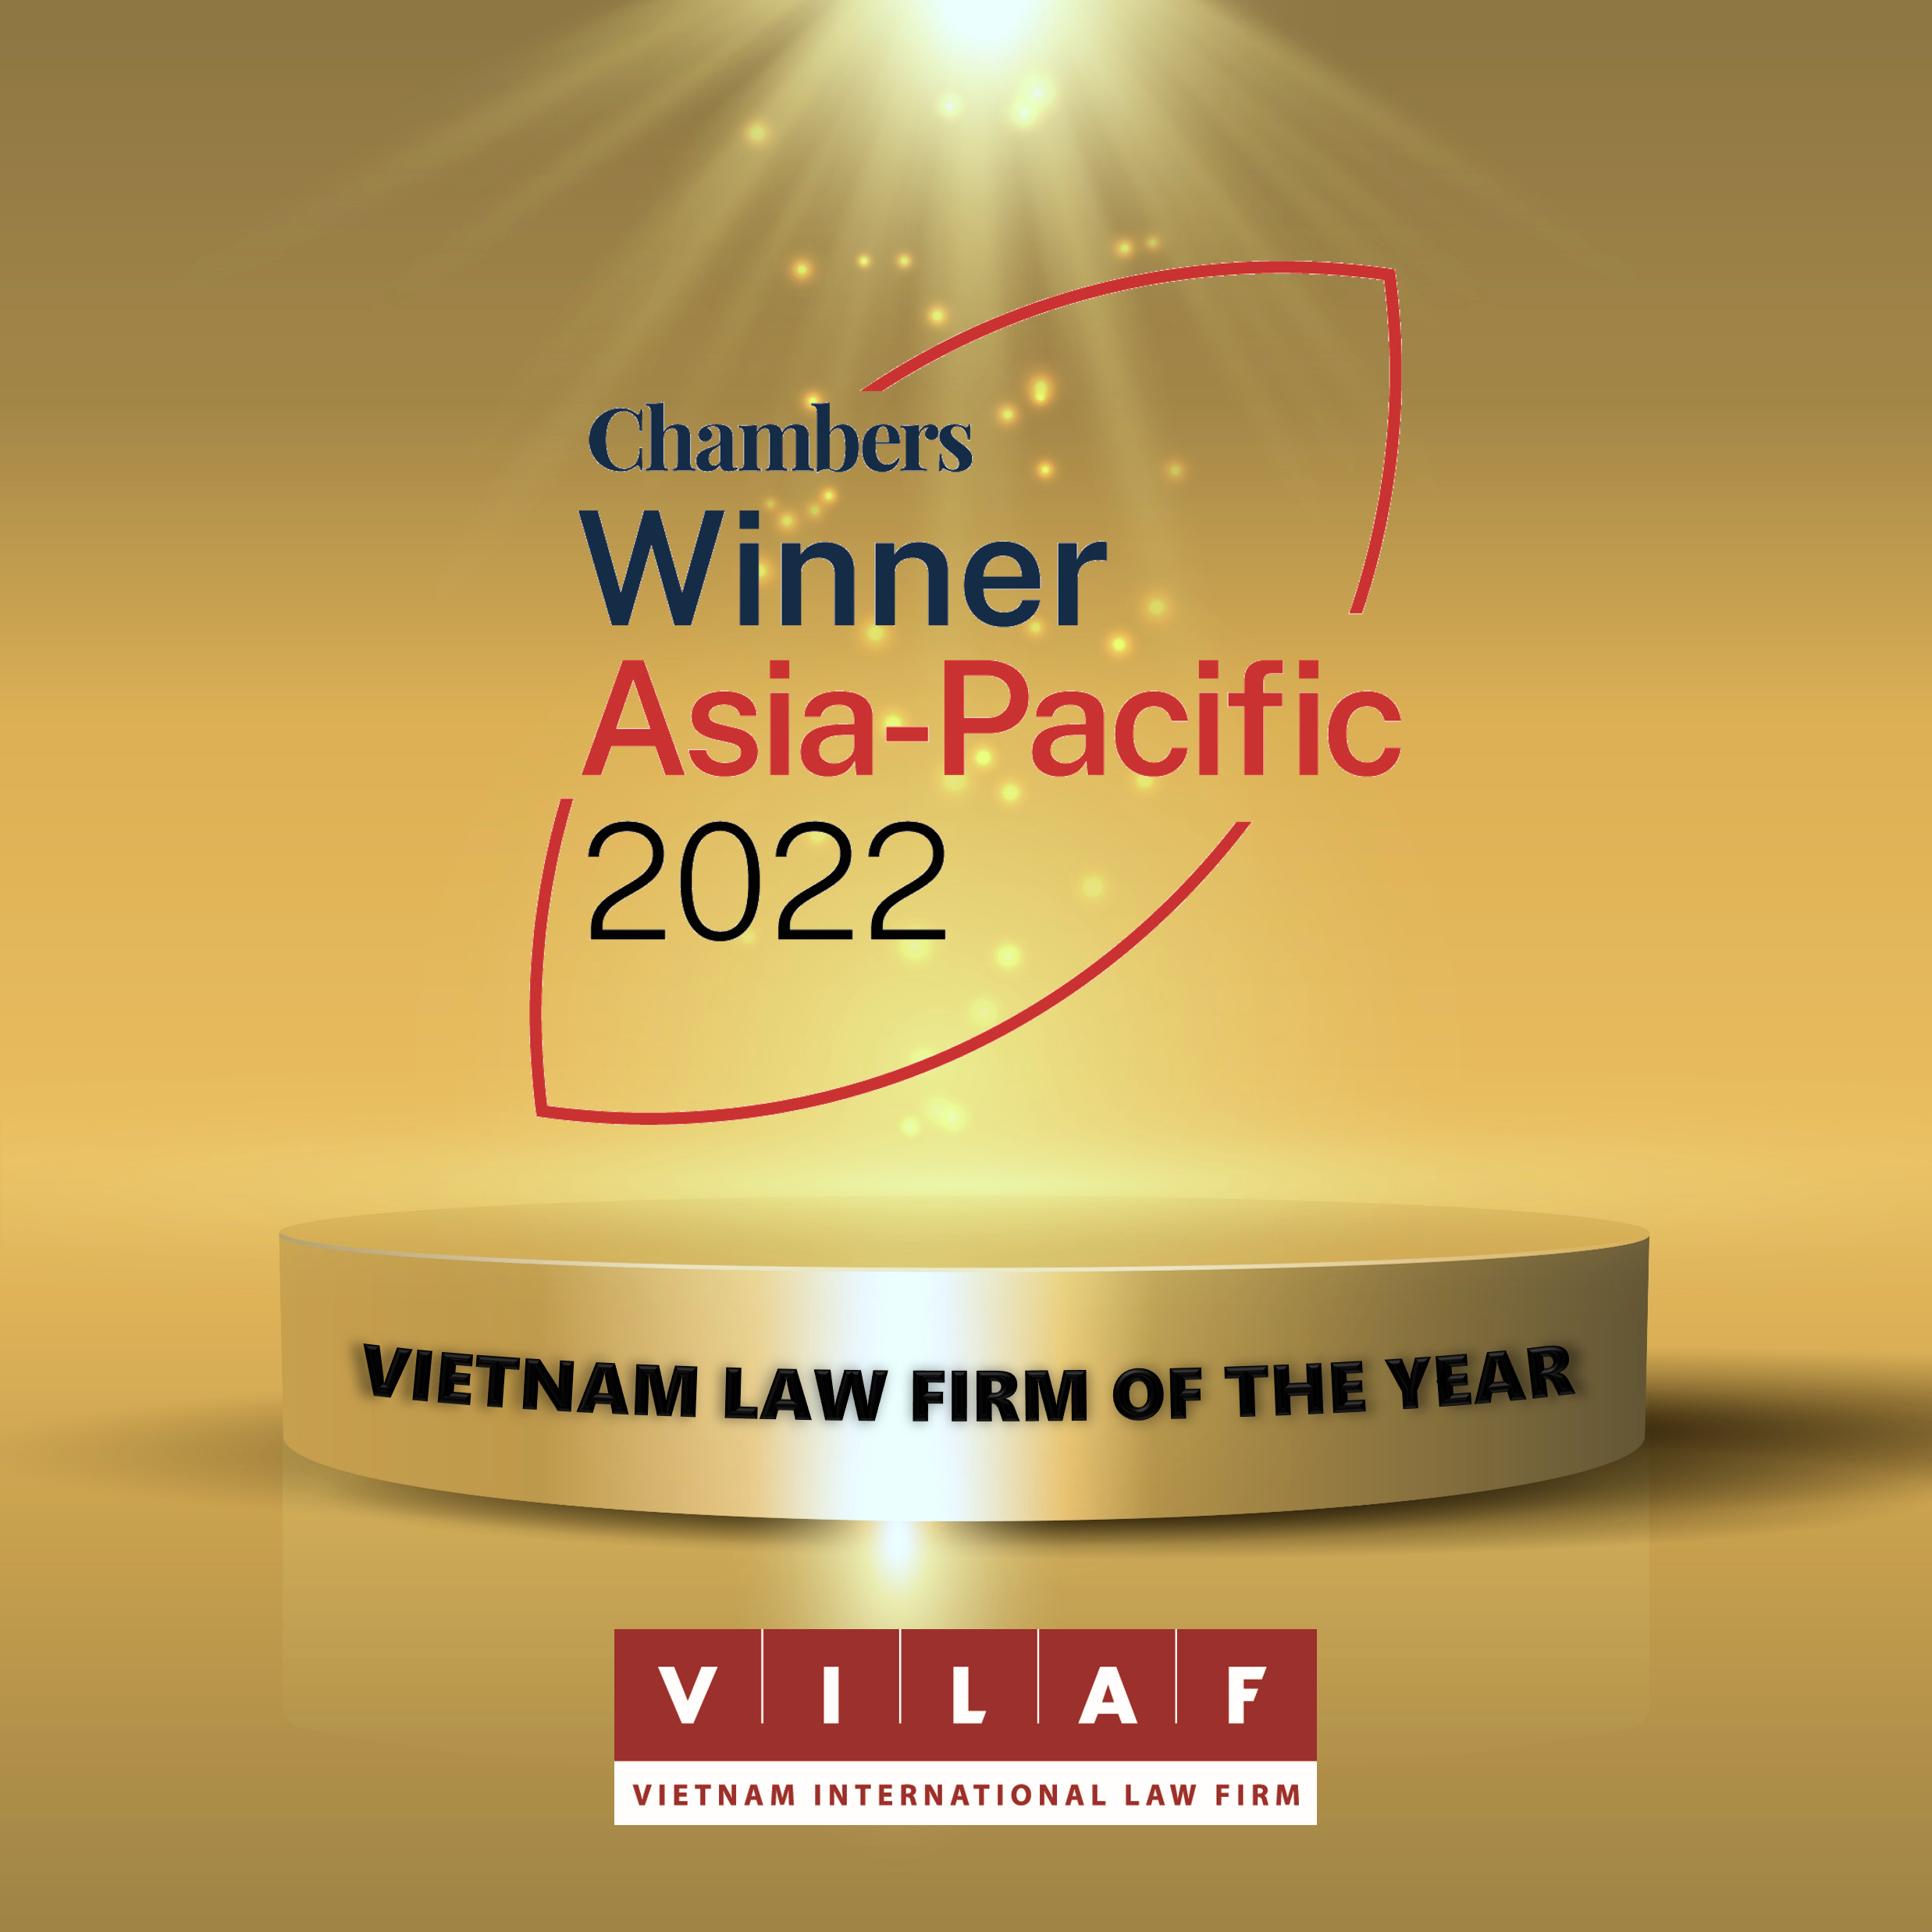 VILAF won Chambers Asia Pacific Vietnam Law Firm of the Year Award 2022 VILAF Vietnam